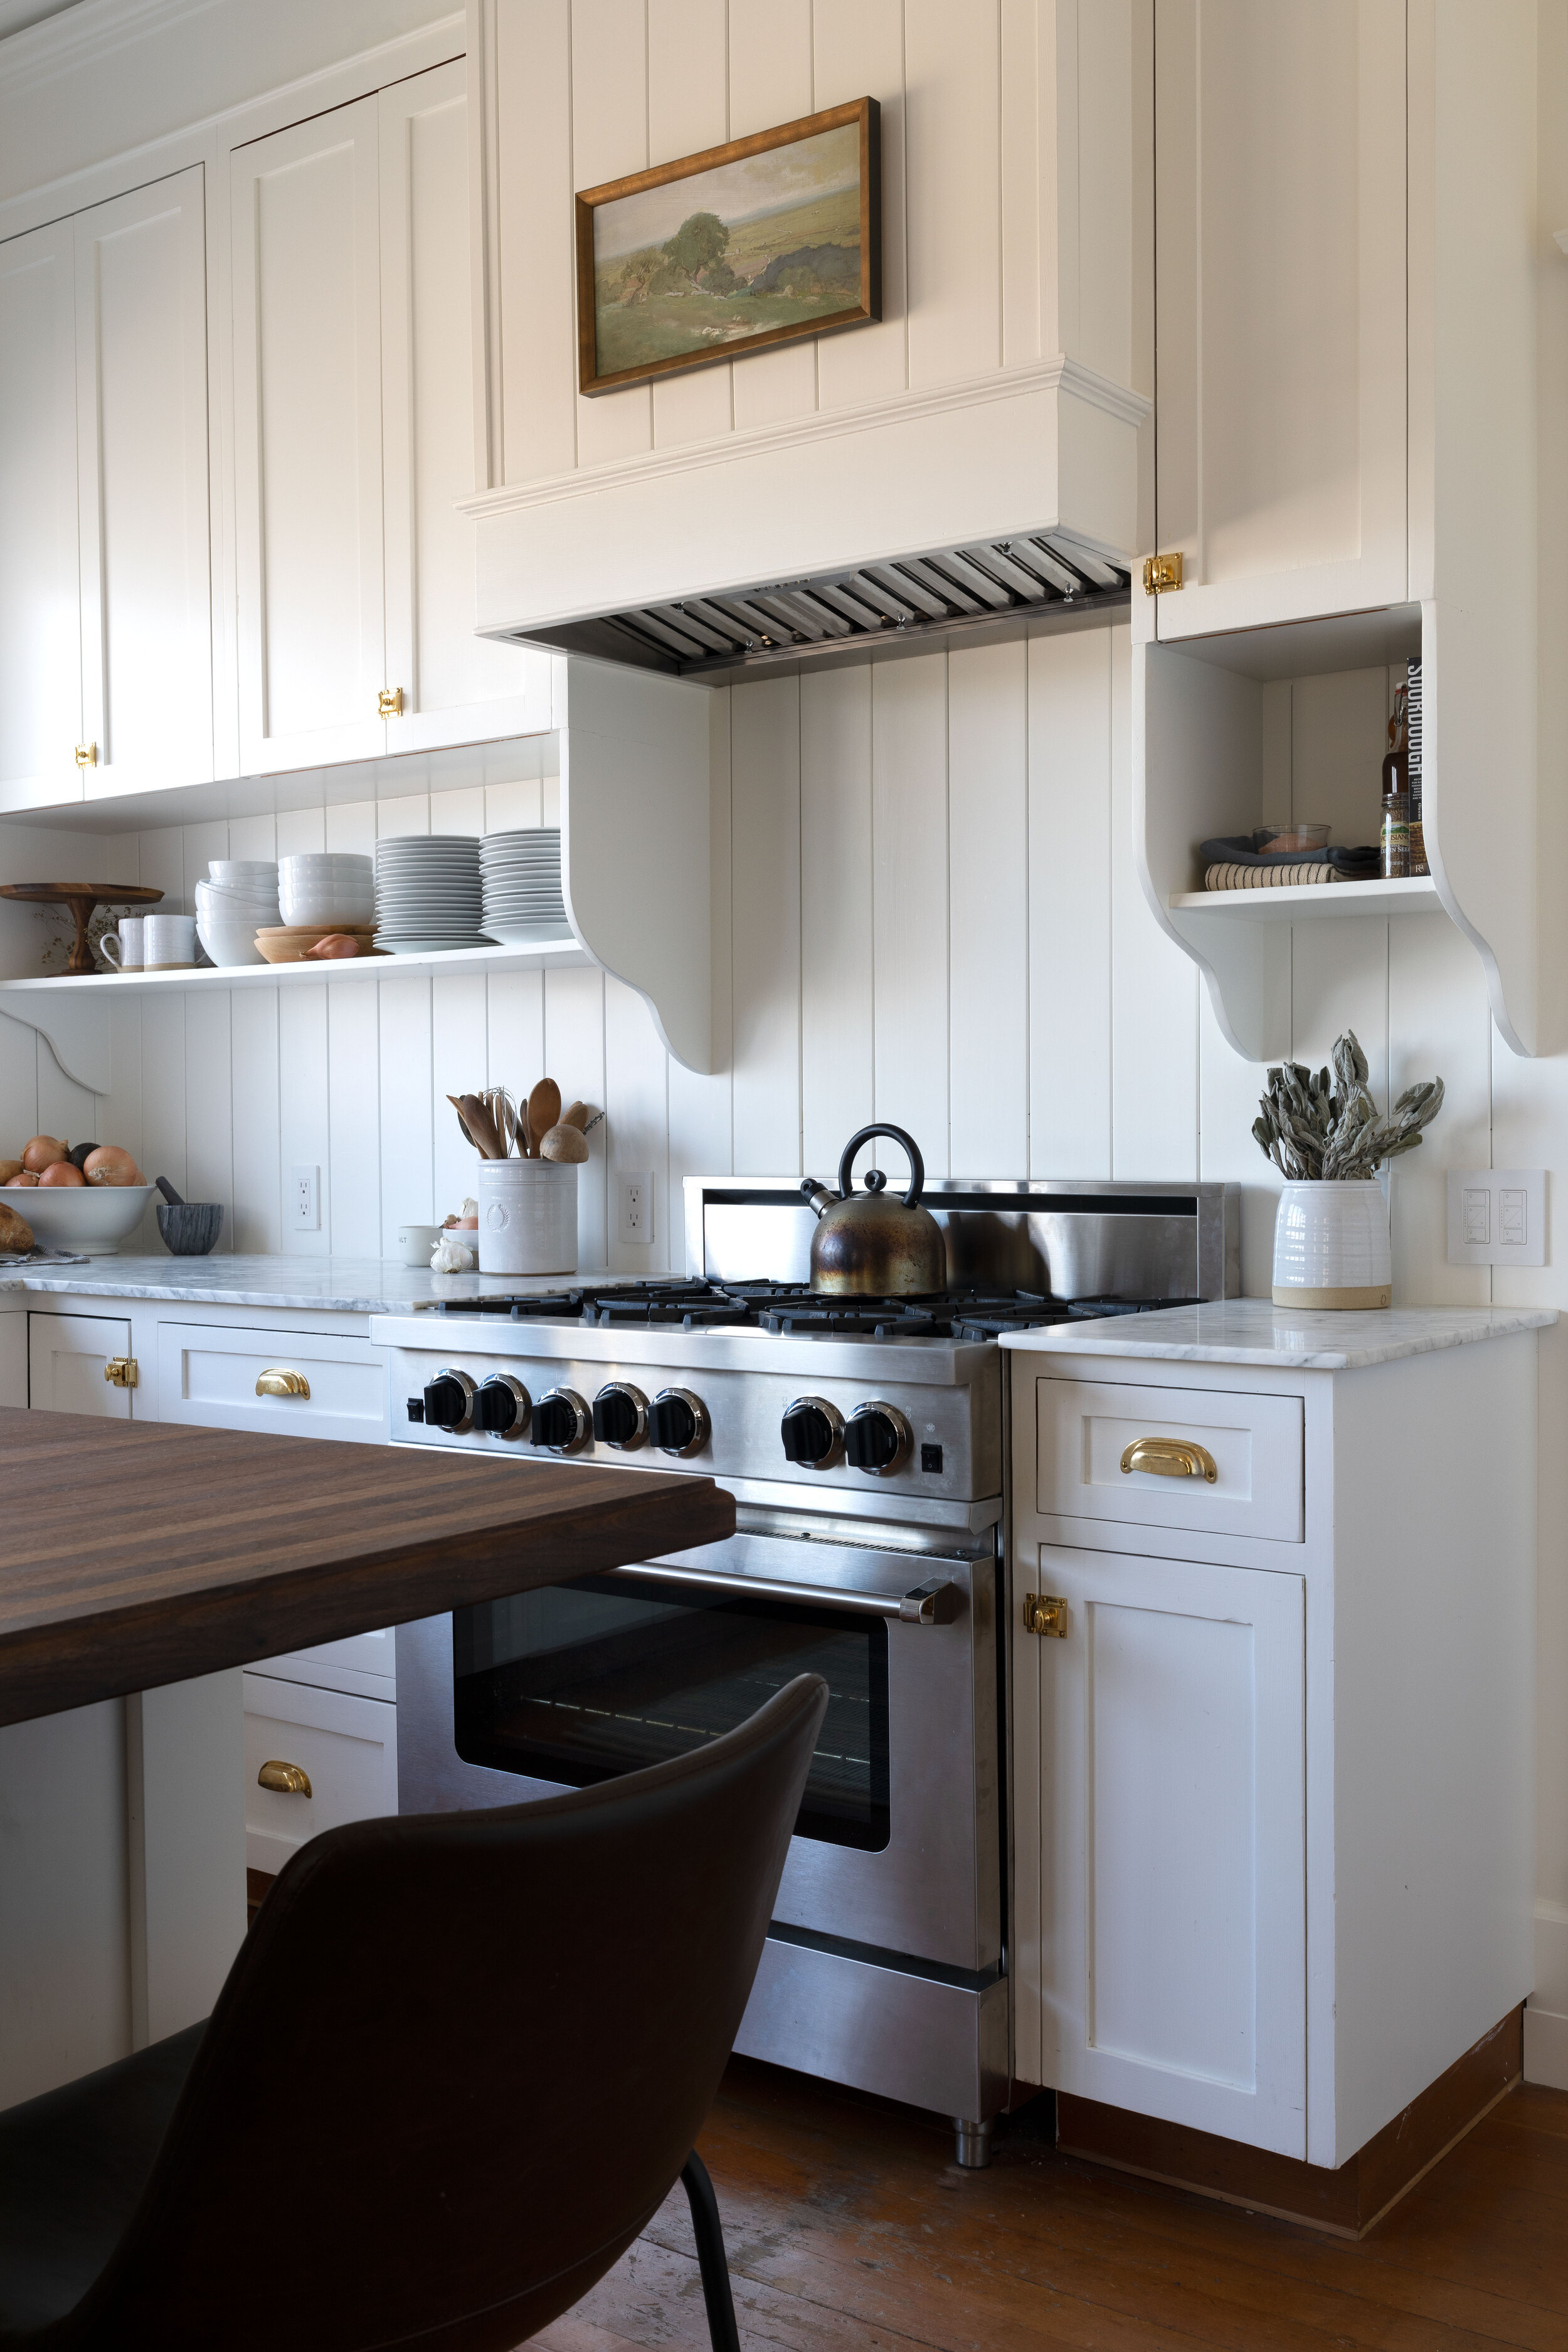 Why We Added a Backsplash To our Range (+ How the Paneling is Holding ...